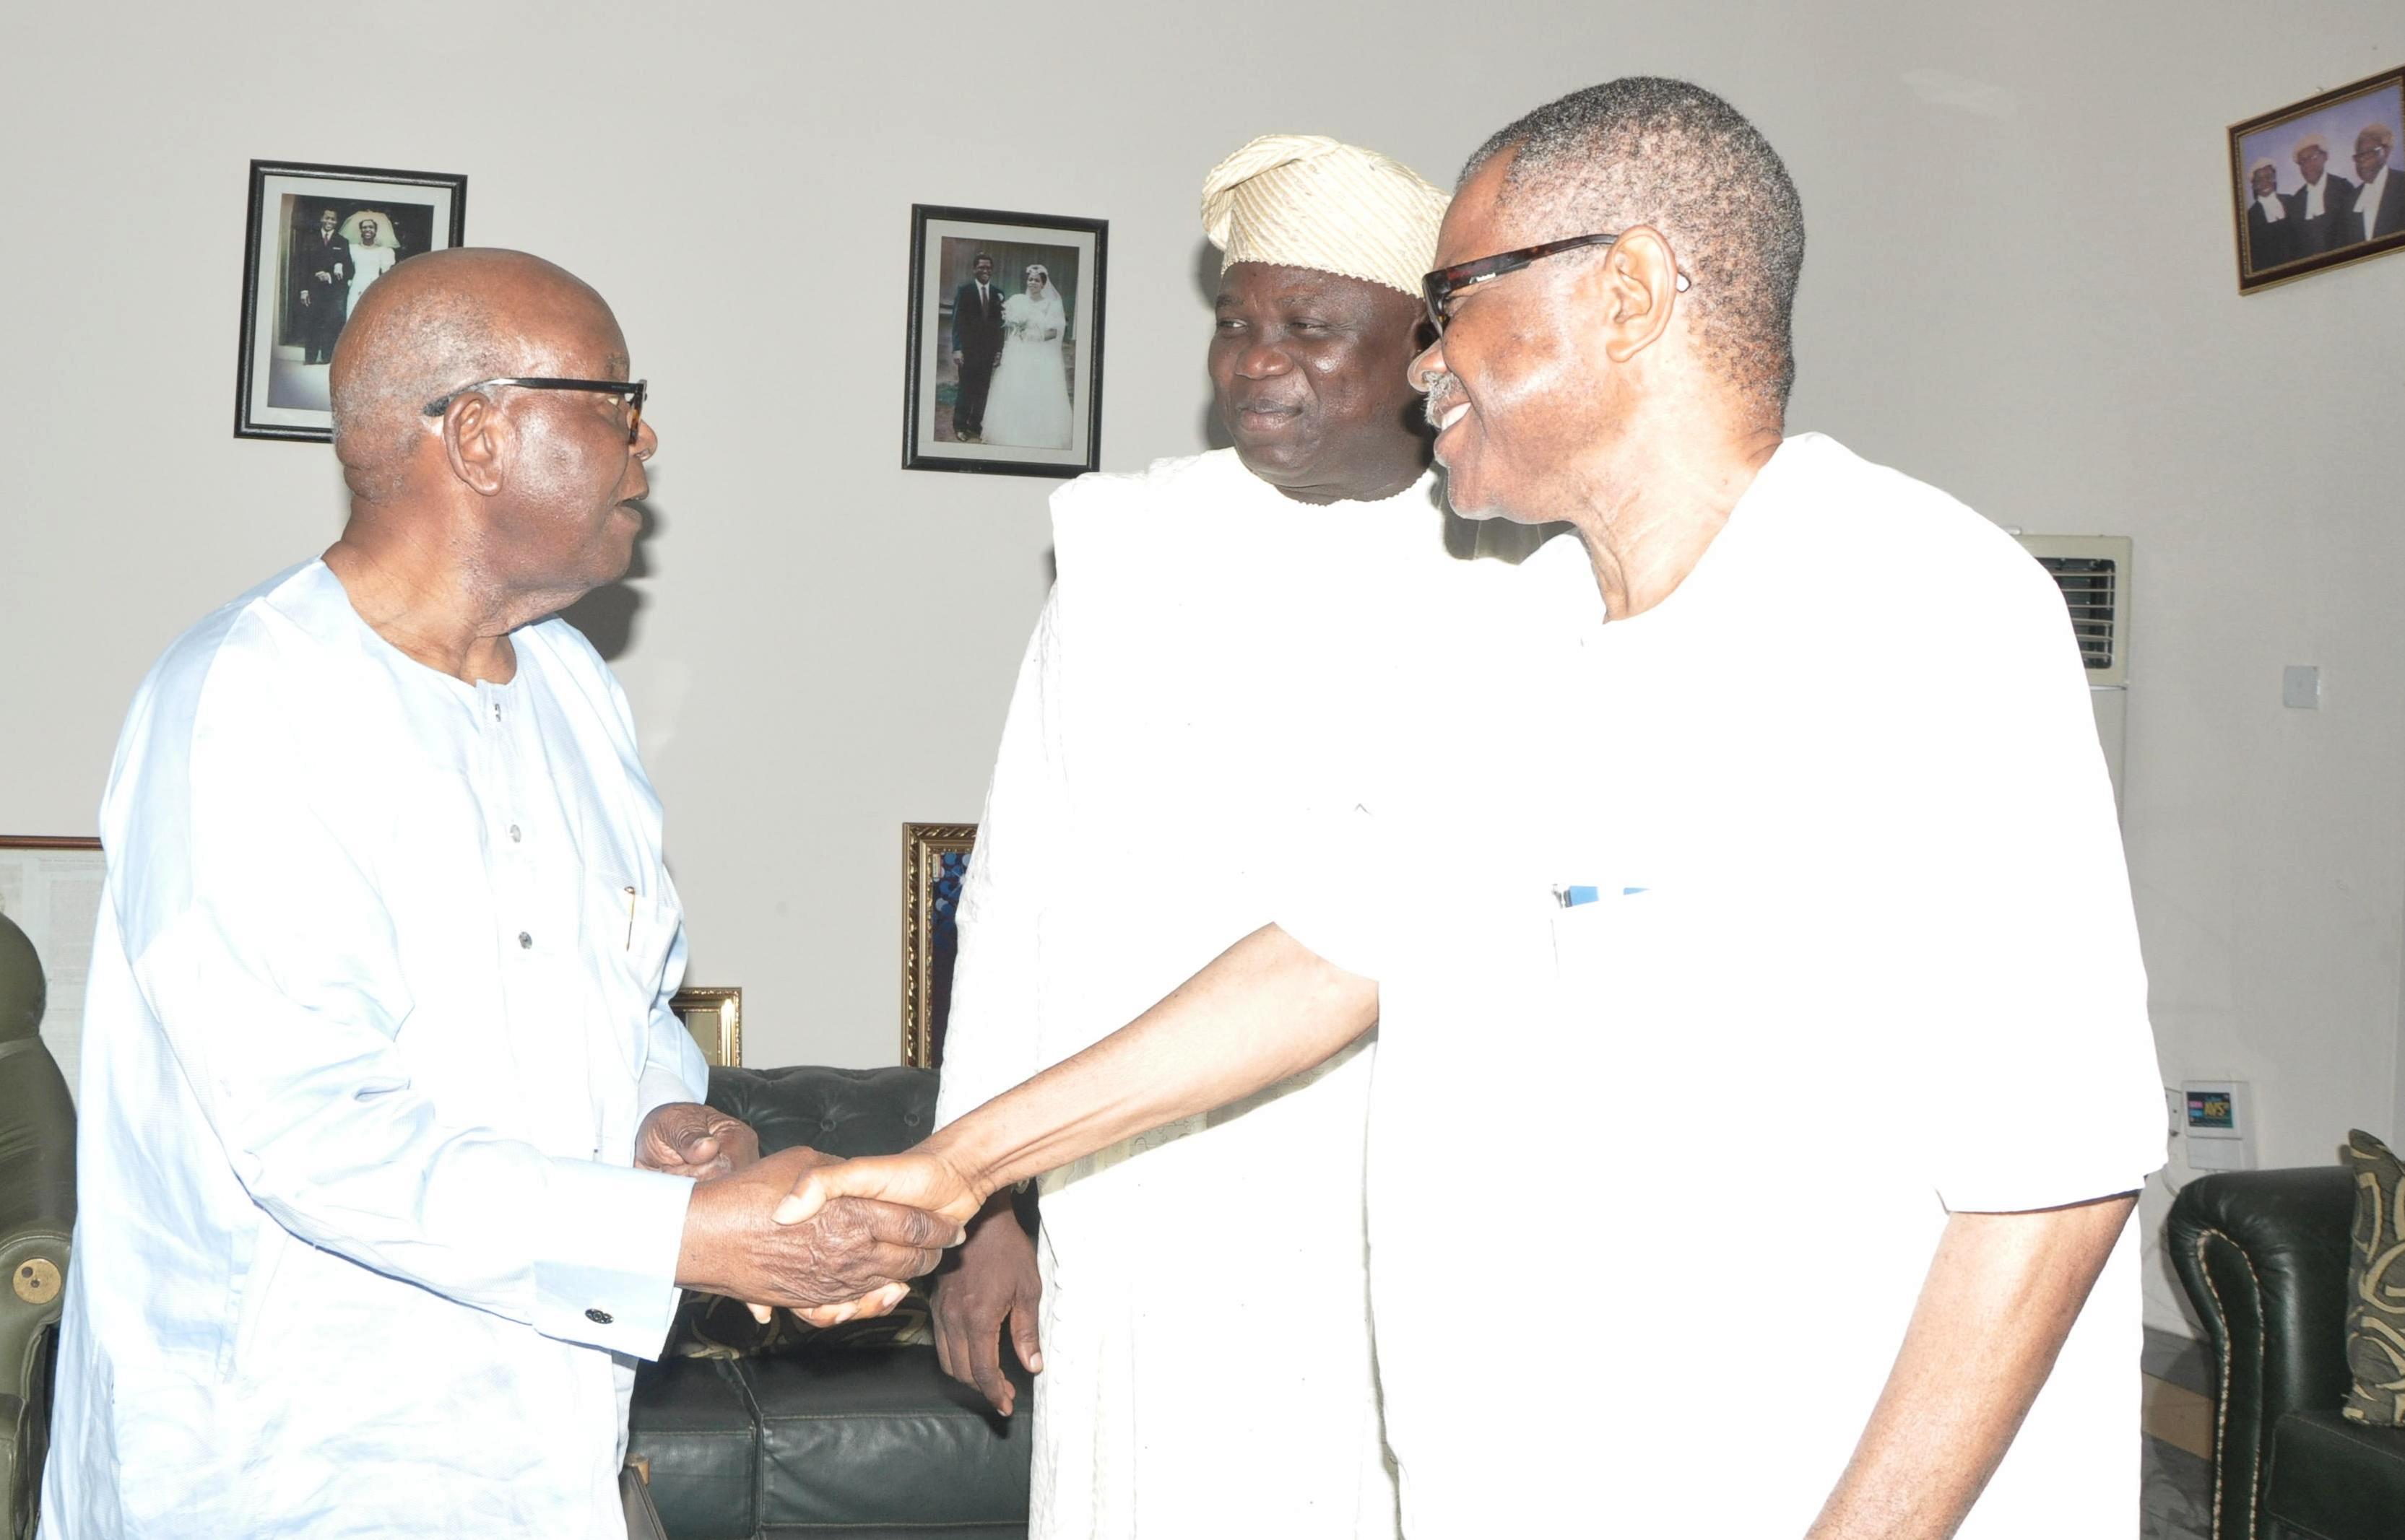 Lagos State Governor, Mr. Akinwunmi Ambode (middle) with Afenifere Leader,  Pa Olaniwun Ajayi (left) and Vice Chairman, South West APC, Chief Pius Akinyele during a courtesy visit to Pa Olaniwun at his Ijebu-Ishara residence in Ogun State, on Sunday, September 20, 2015.